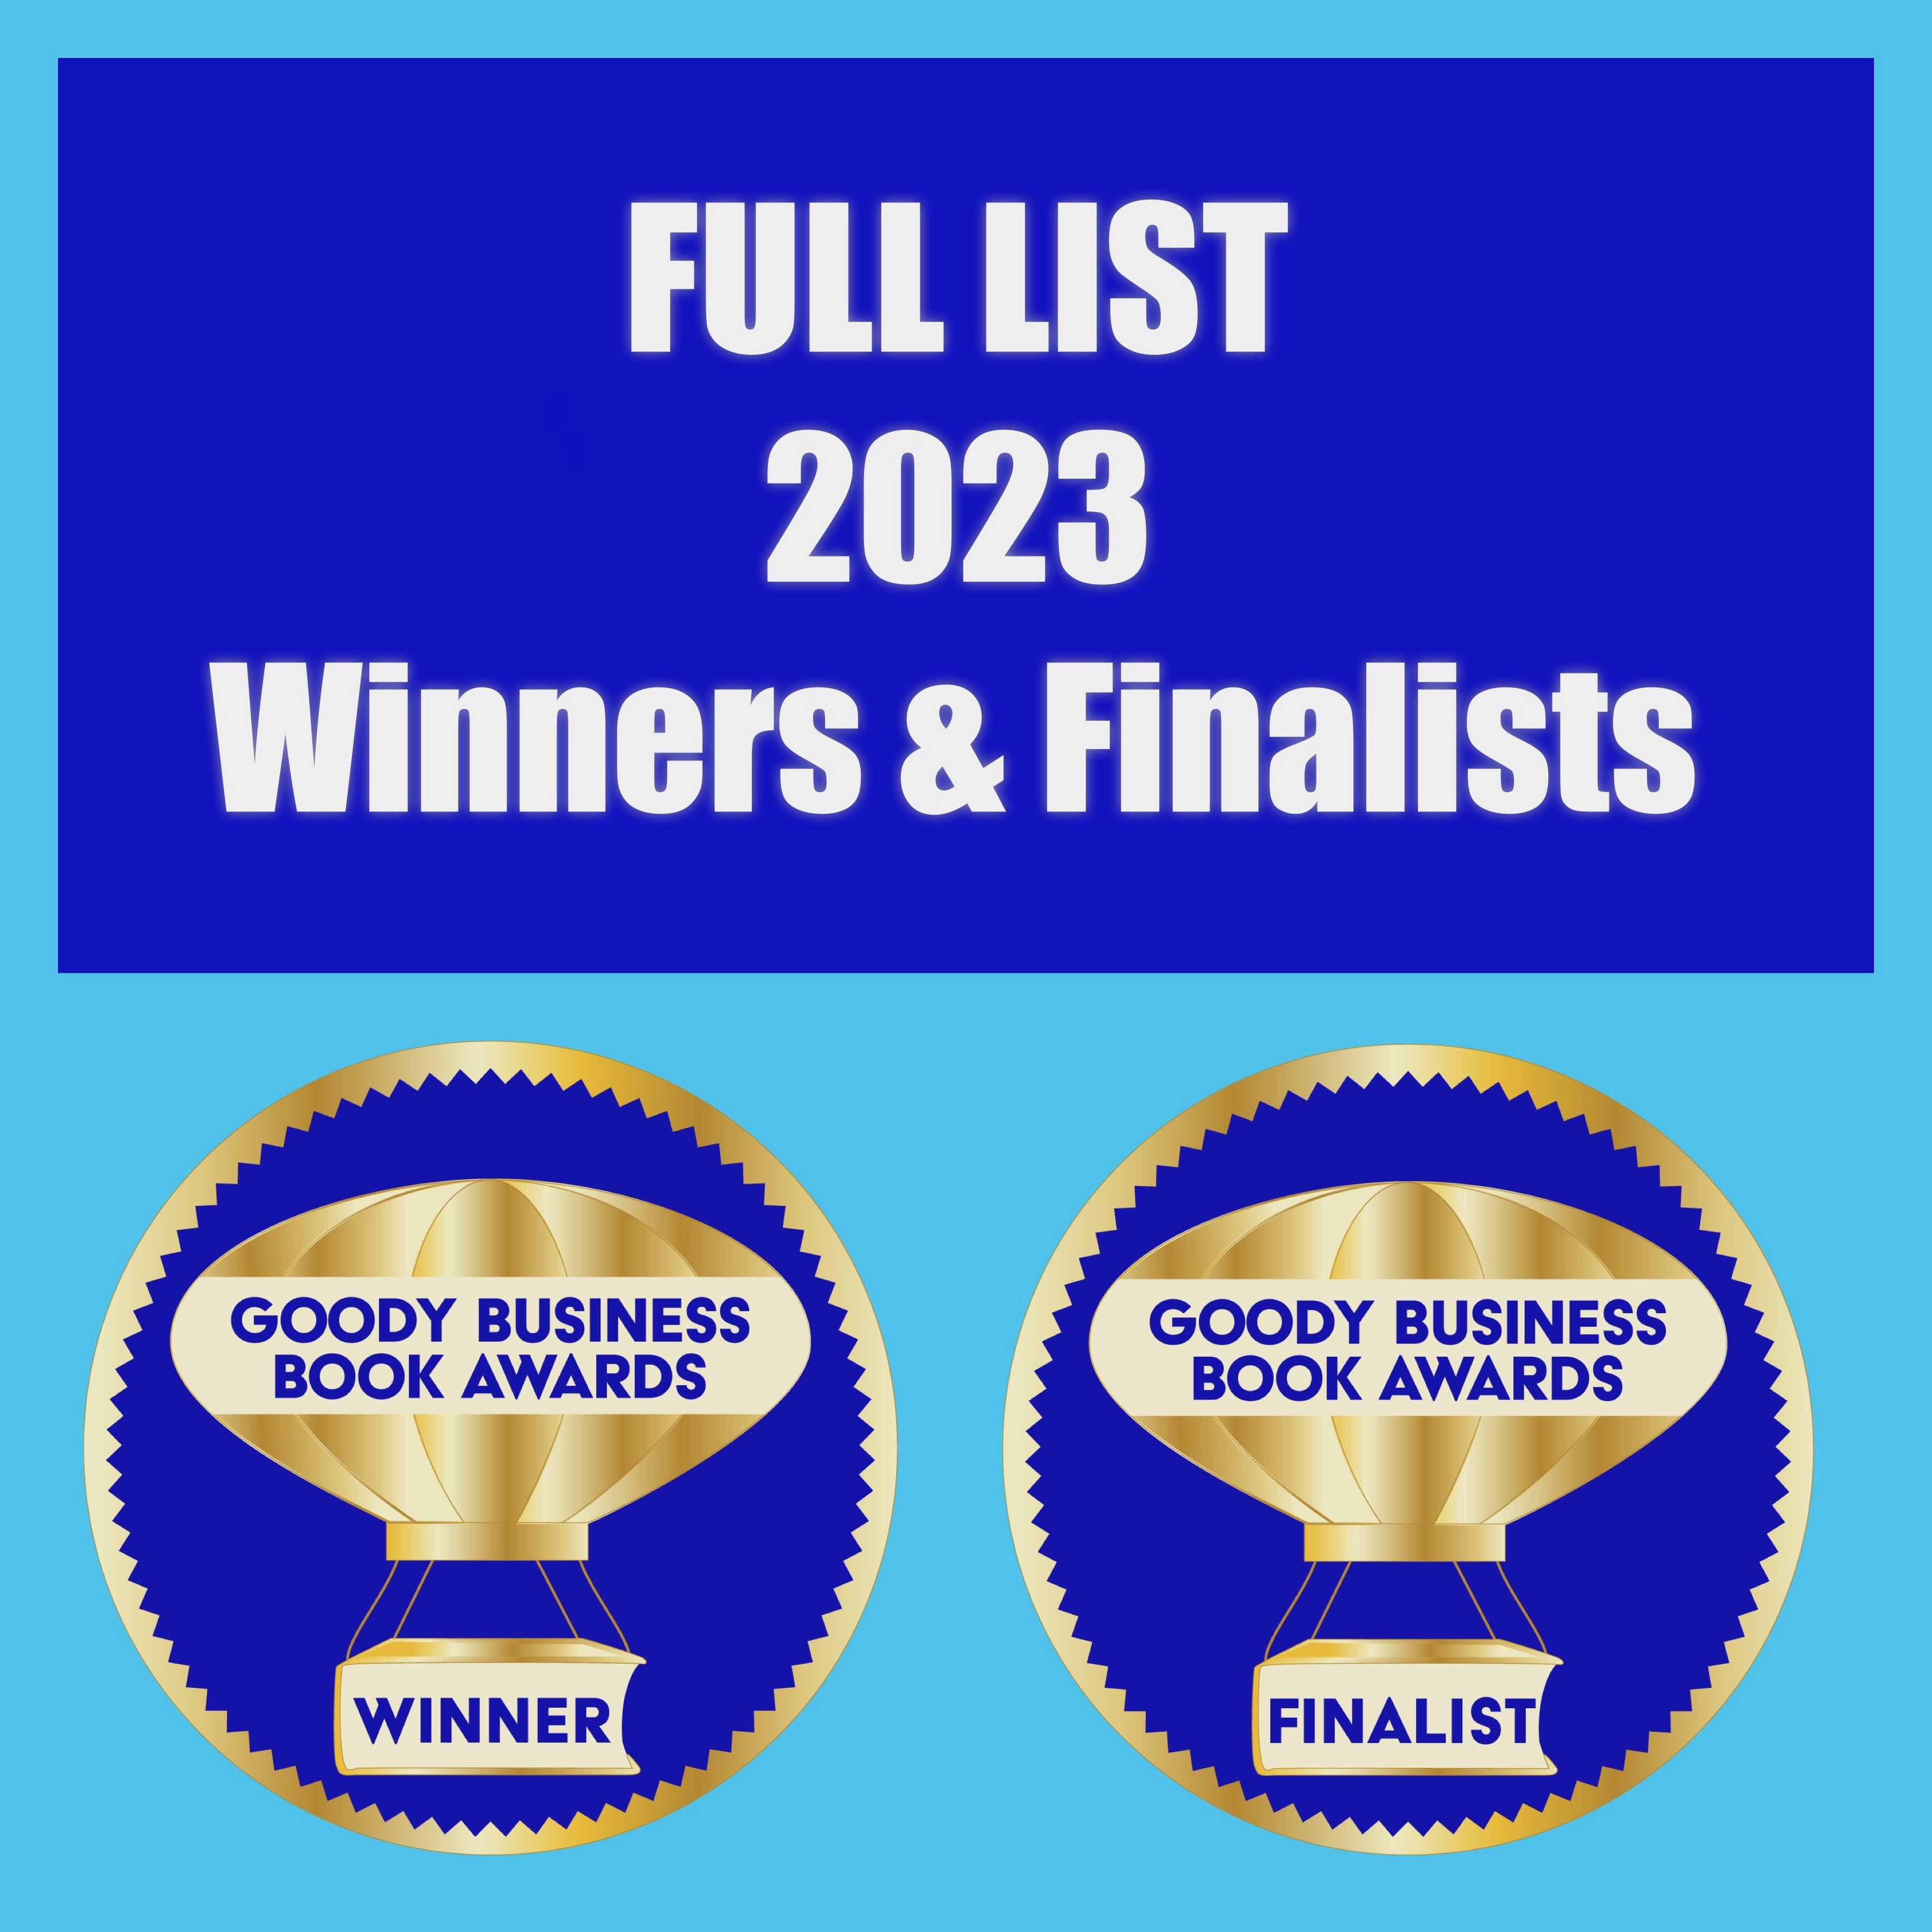 Announcing the FULL LIST of the 2023 Award-Winning Authors for the Goody Business Book Awards with 154 Winners and Finalists